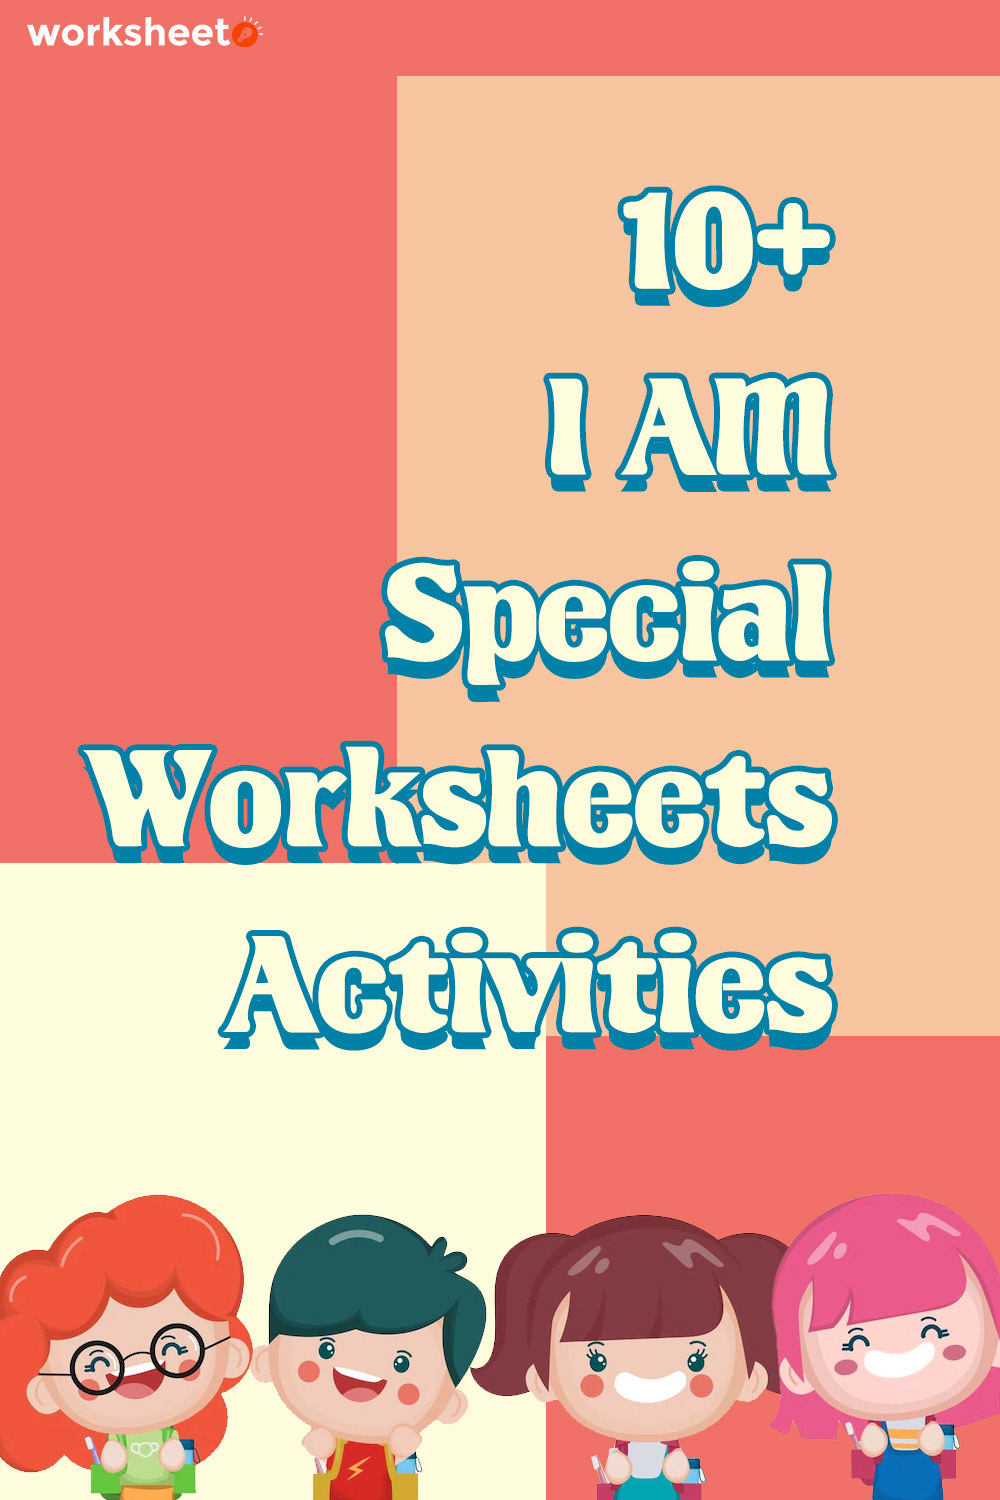 15 Images of I AM Special Worksheets Activities